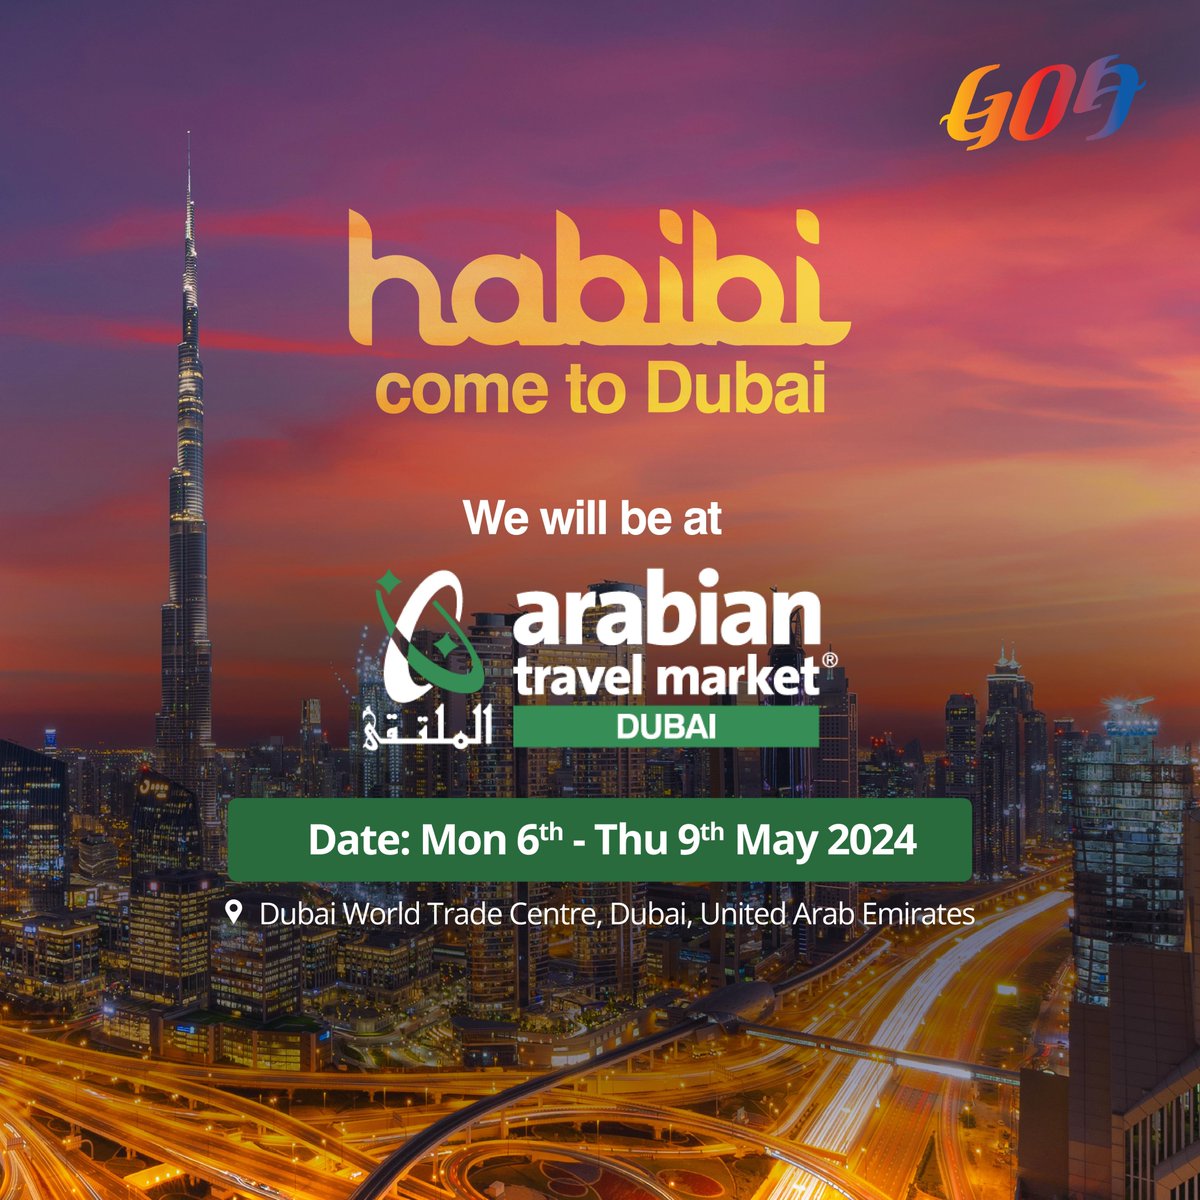 Join us at ATM Dubai 2024 from May 6th to 9th! Explore Goa's vibrant tourism offerings and sustainable initiatives at Stand No: AS7259 in Dubai World Trade Centre. Let's connect and create unforgettable travel experiences together! #GoaTourism #ATMDubai #ATMDubai2024 #Goa